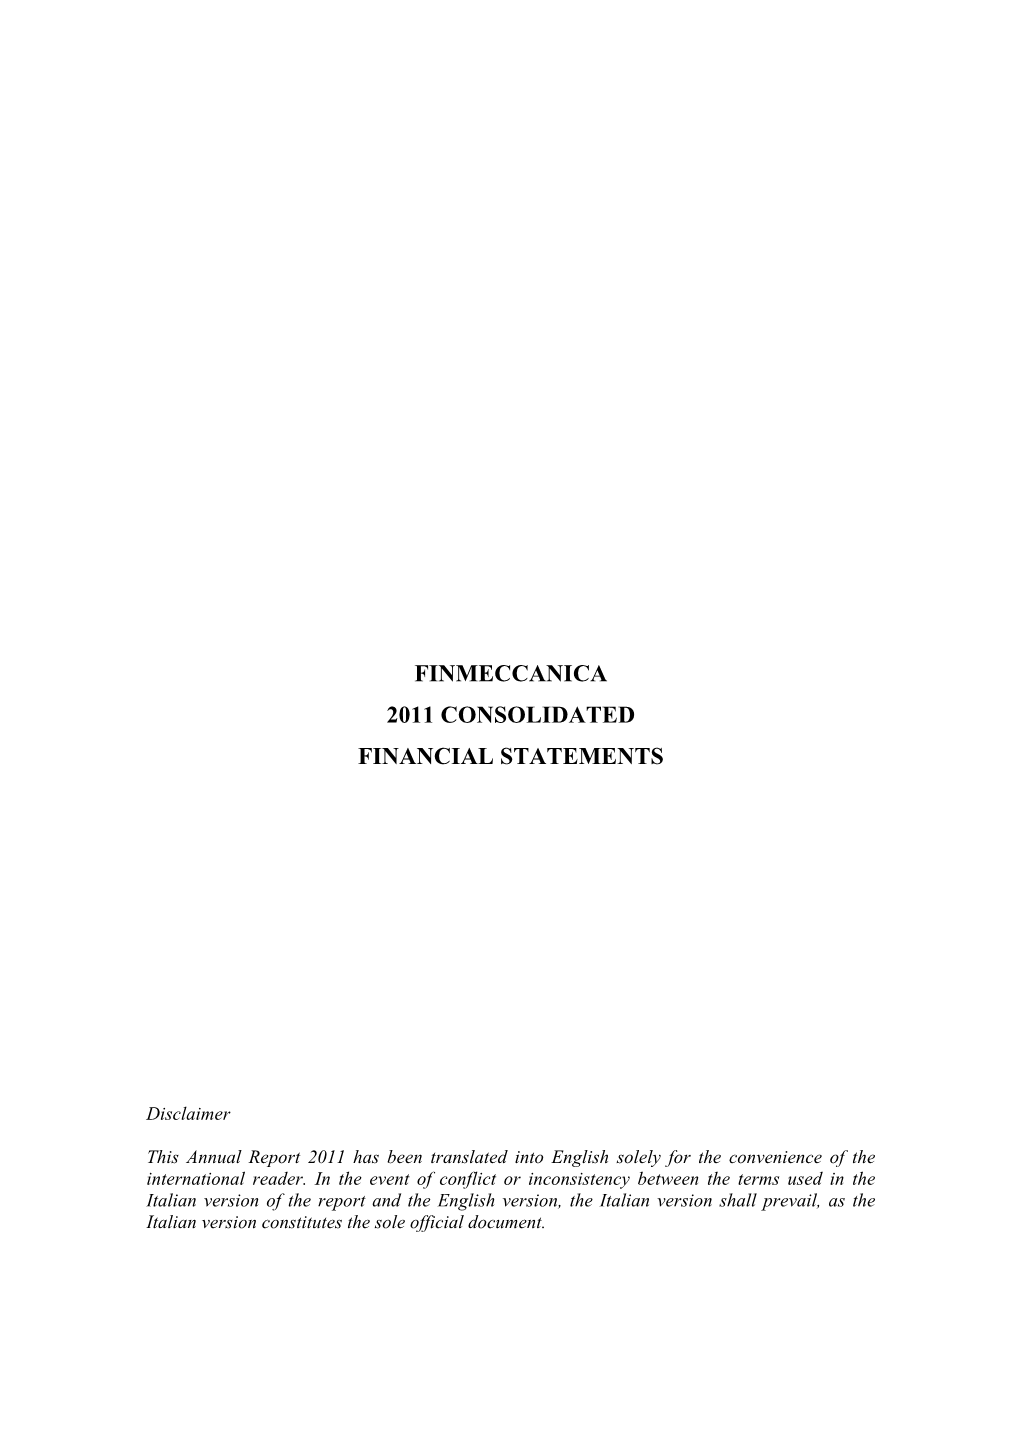 Finmeccanica 2011 Consolidated Financial Statements